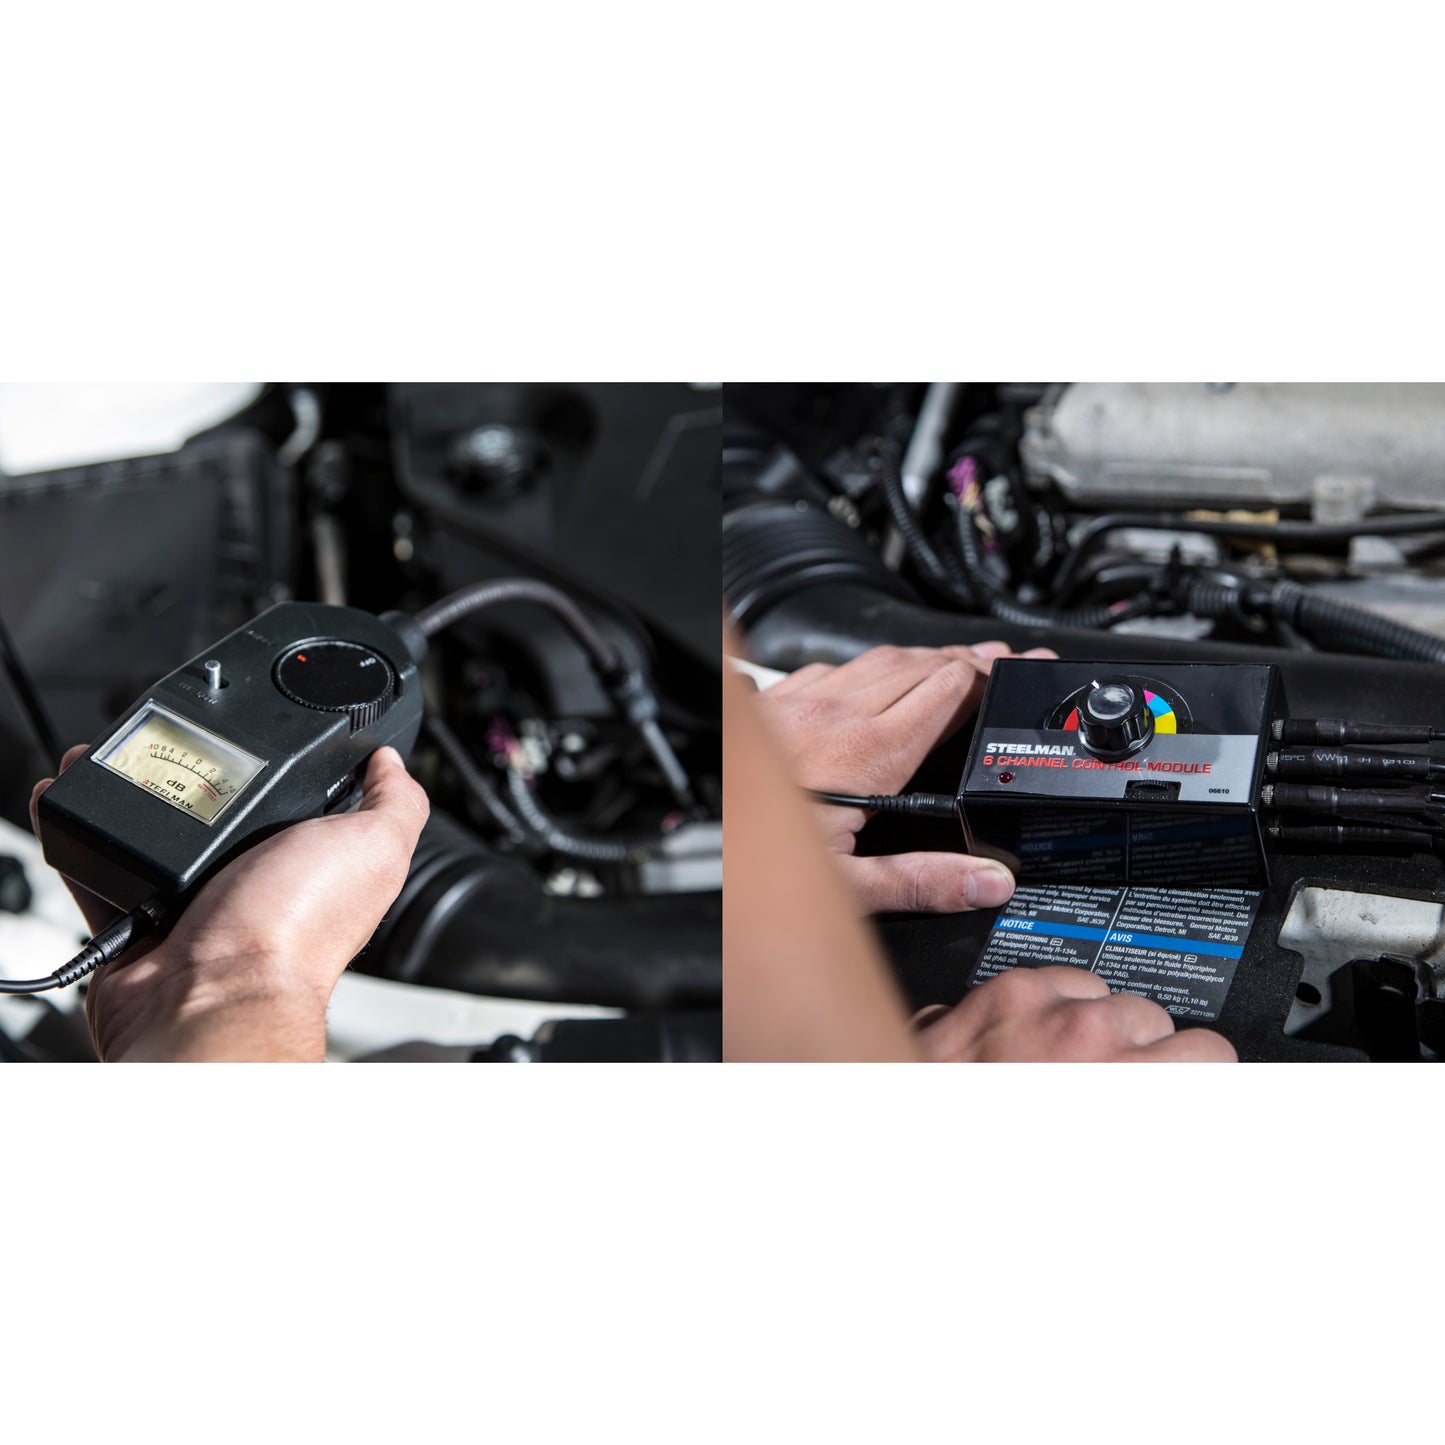 ChassisEAR and EngineEAR II Auto Diagnostic Combination Kit